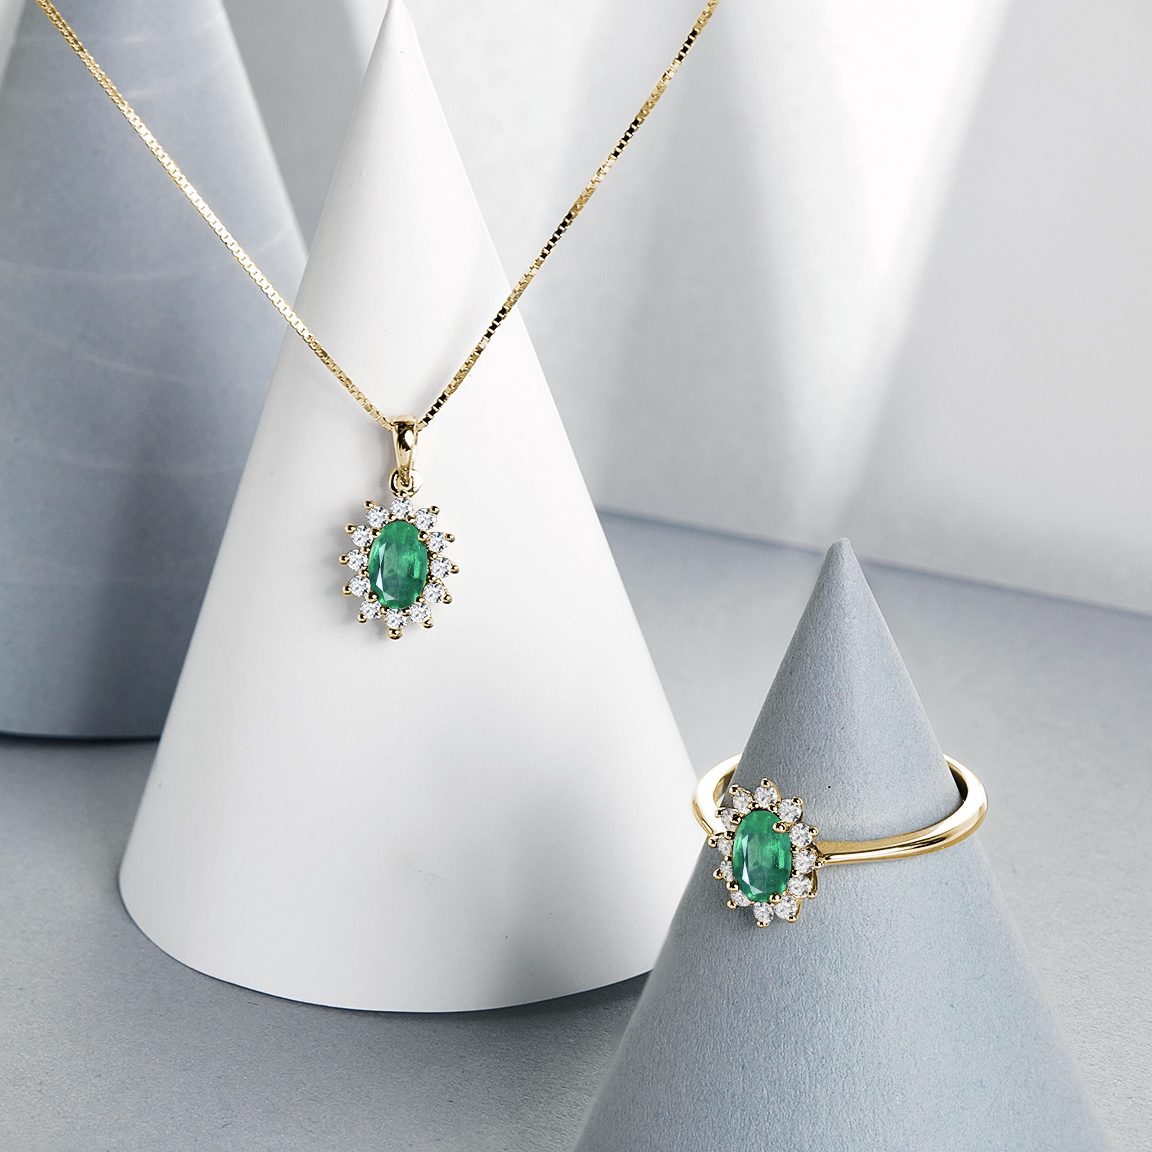 Diamond necklace and ring with emerald in white 14k gold - KLENOTA